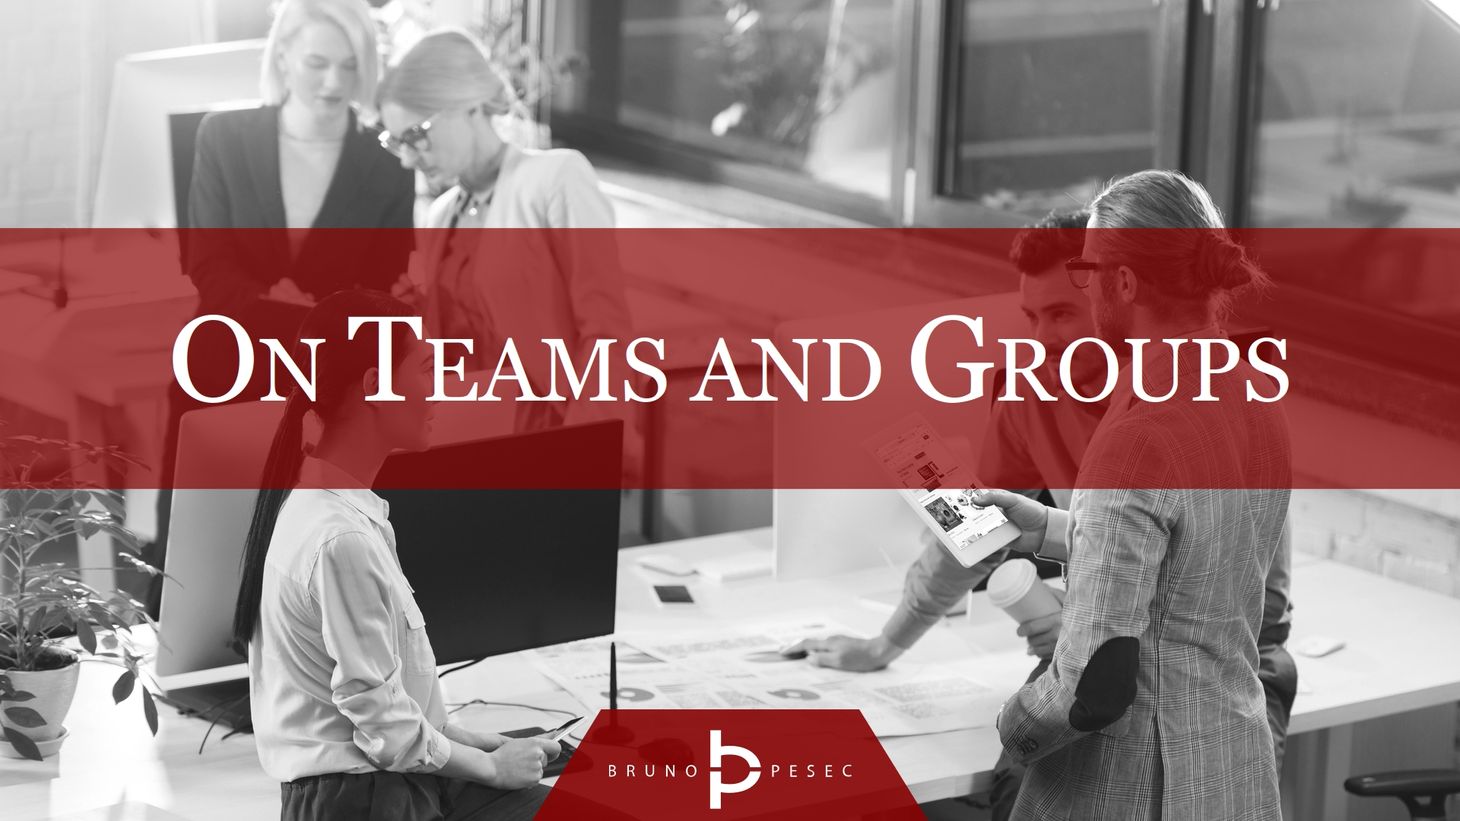 On teams and groups